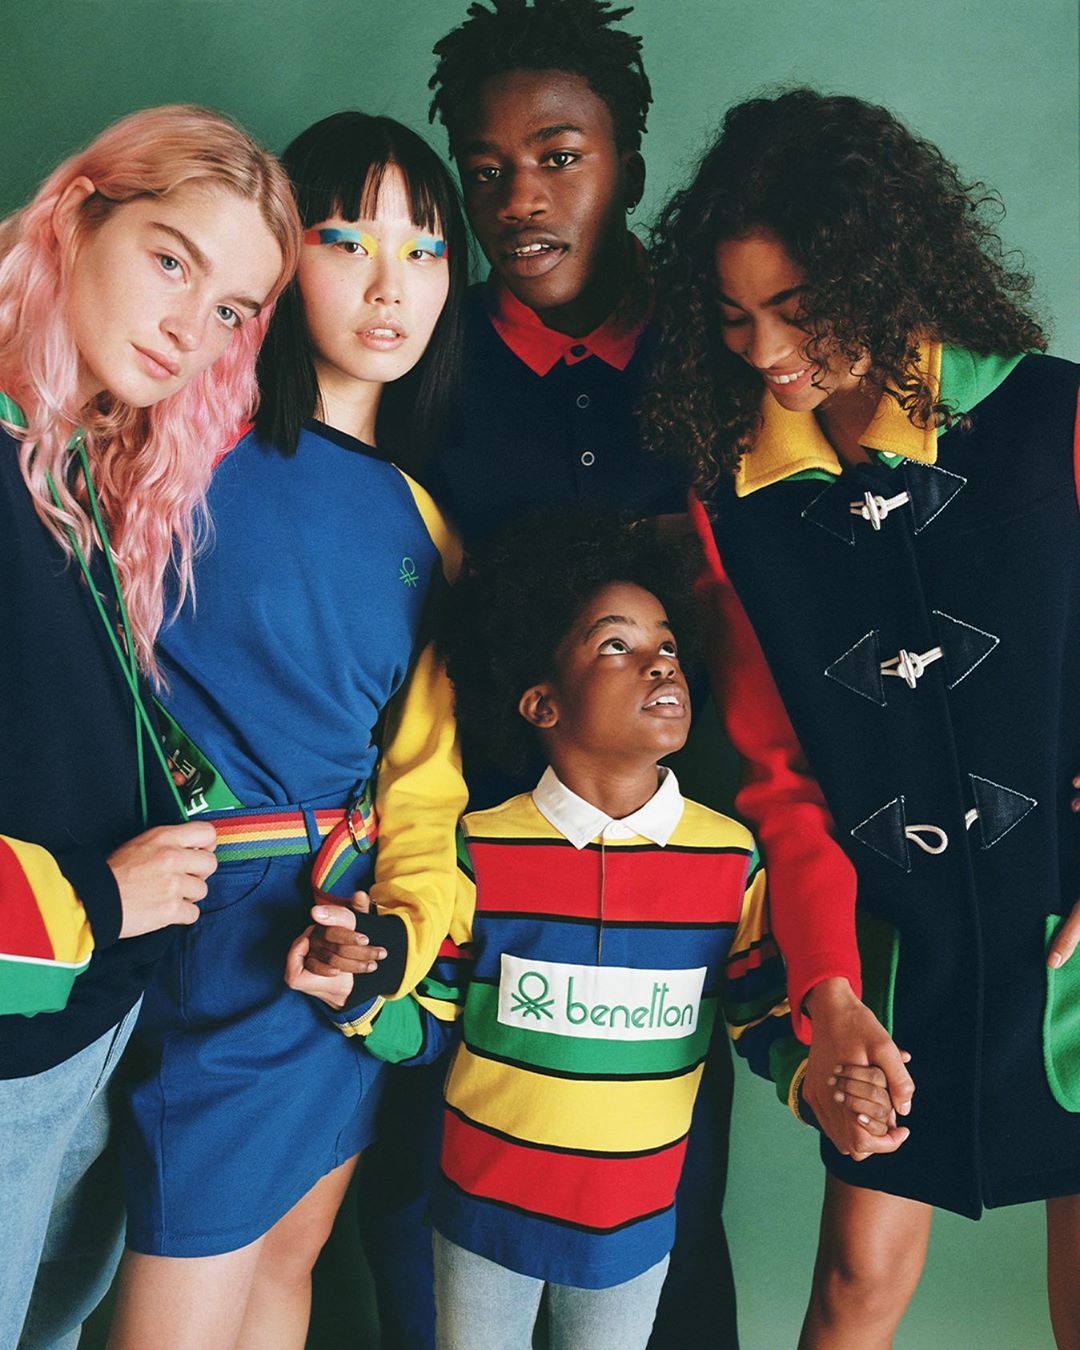 United Colors of Benetton - Living in our multicolor palace.
#Benetton #FW20 @jcdecastelbajac